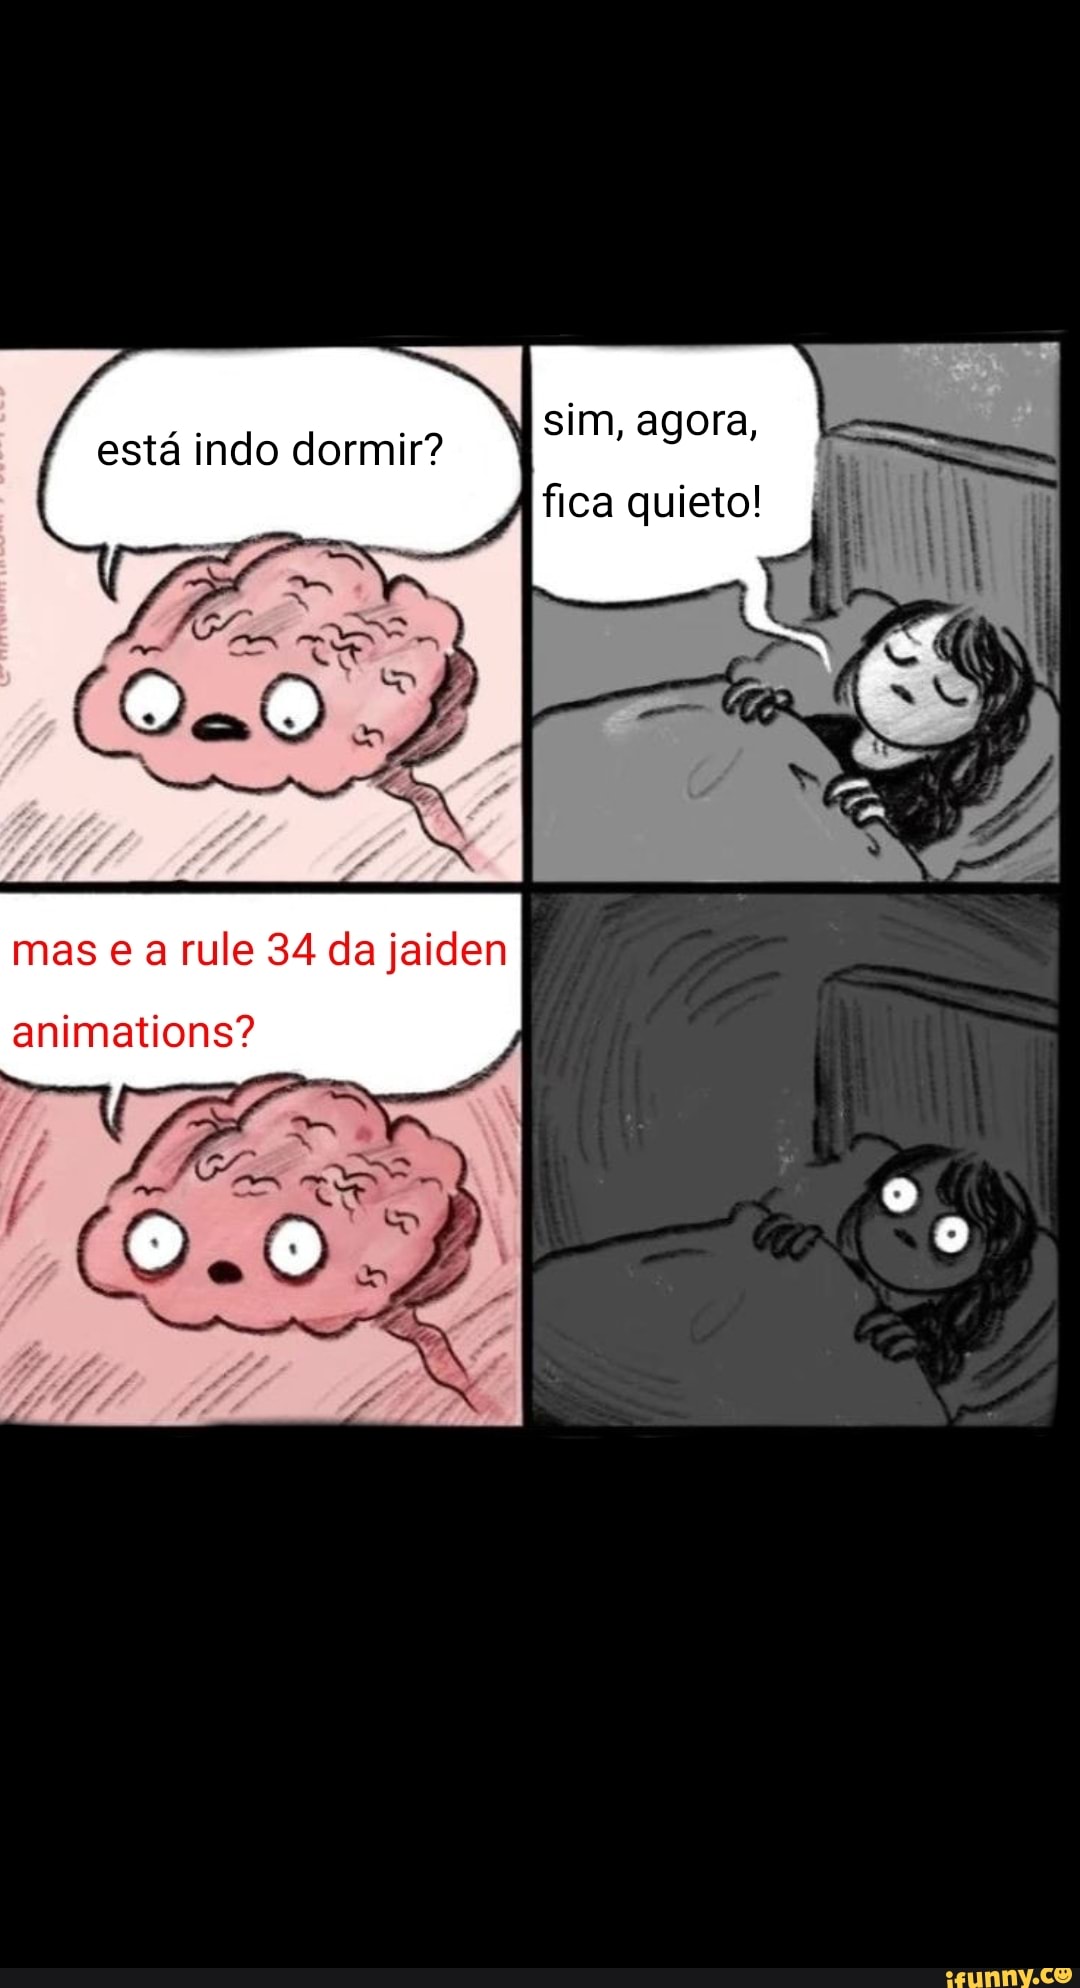 Jaidenanimations memes. Best Collection of funny Jaidenanimations pictures  on iFunny Brazil